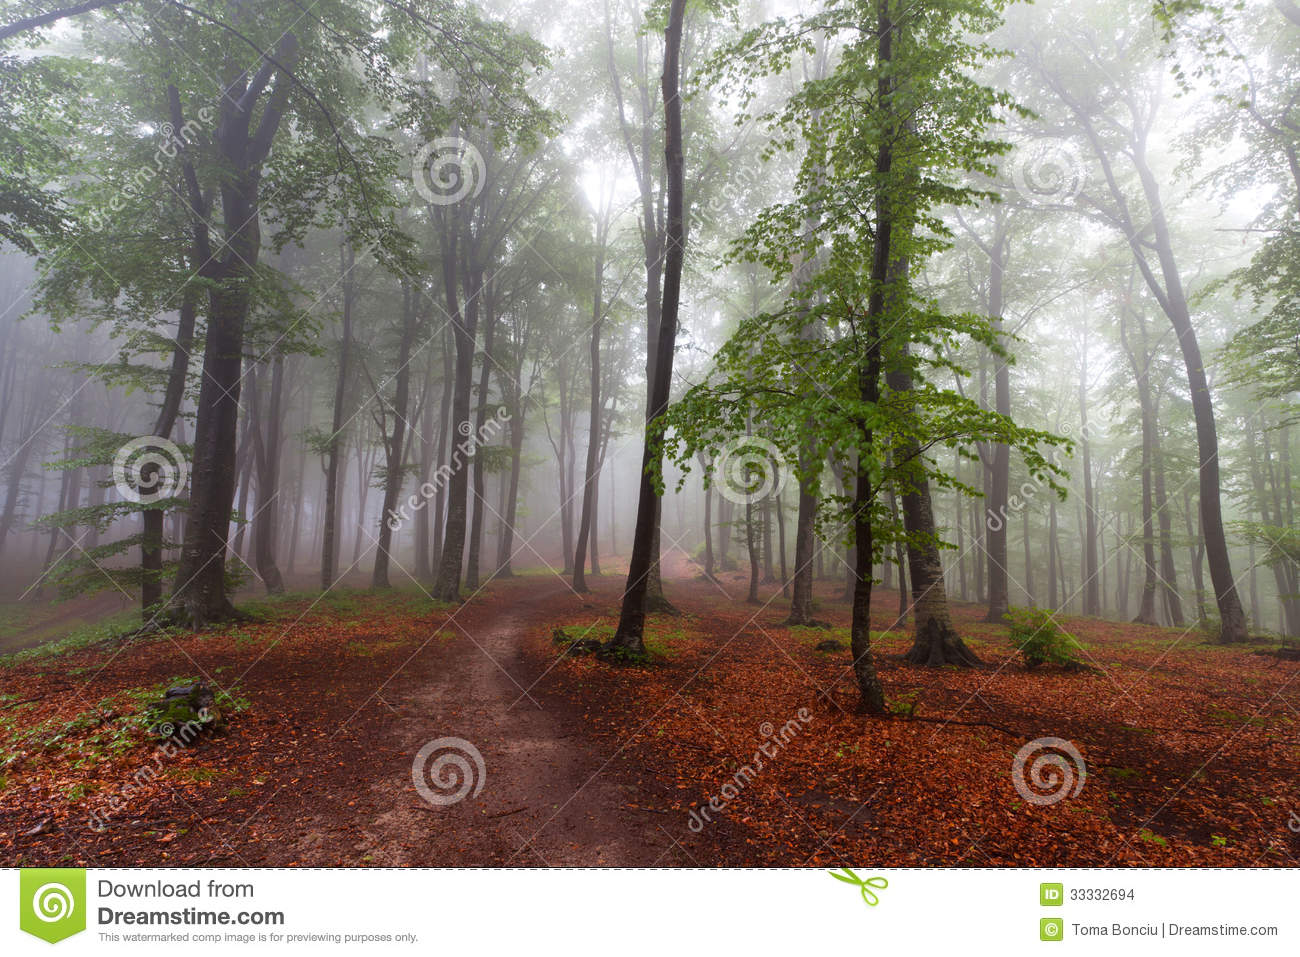 The Beginning Of Autumn  Fall  During A Foggy Day In The Forest  A